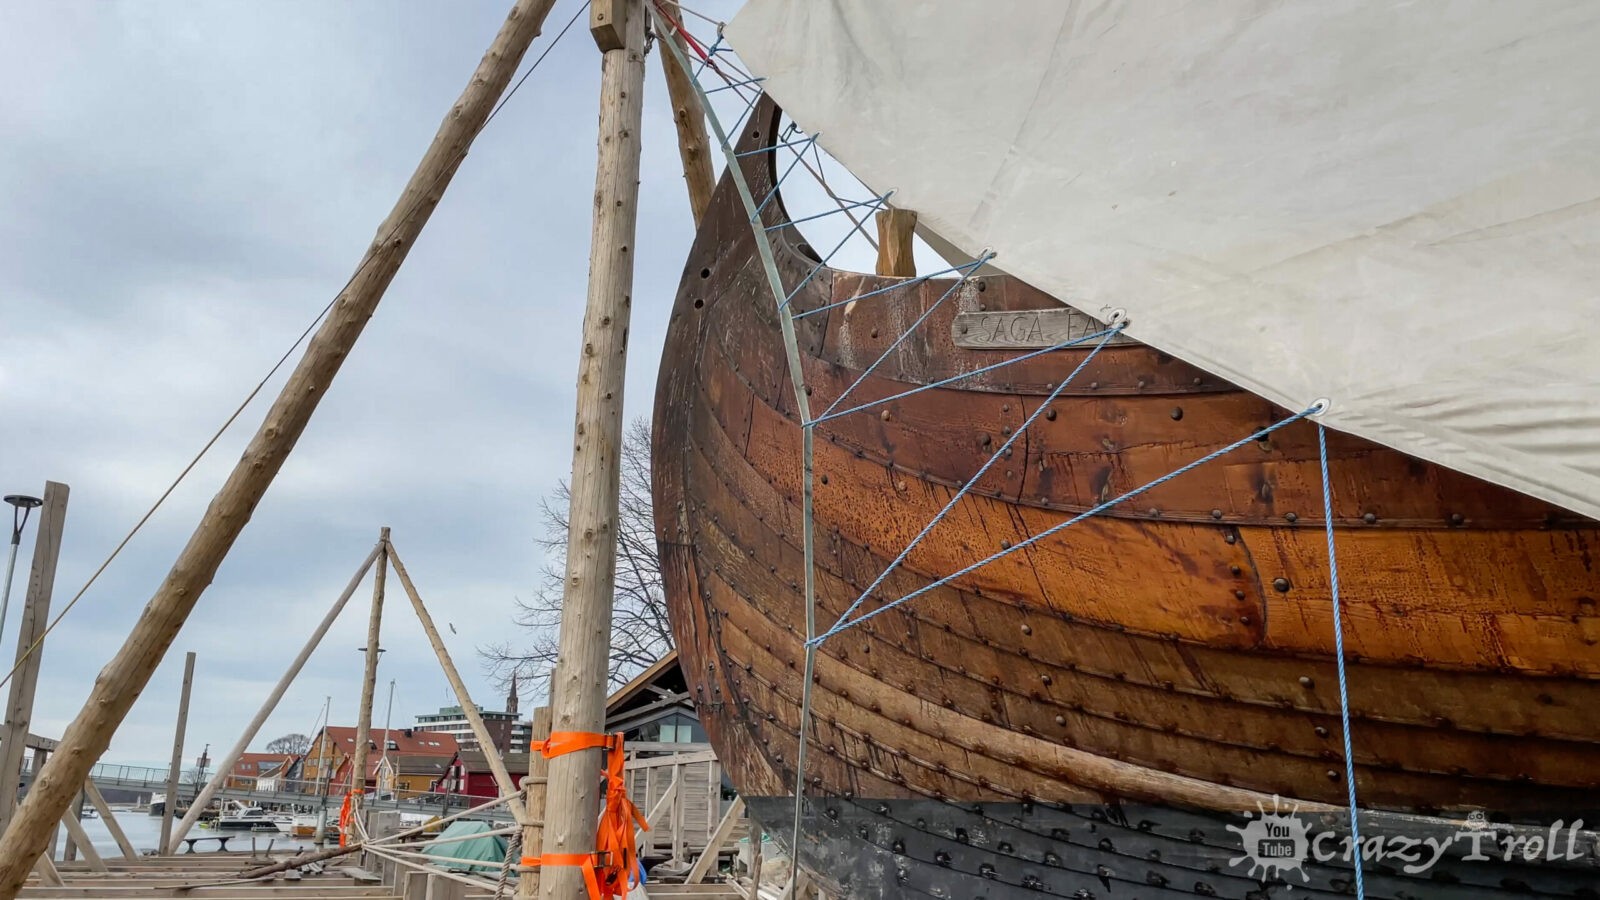 Viking Tourism in Norway: Unraveling the Mysteries of the Norsemen